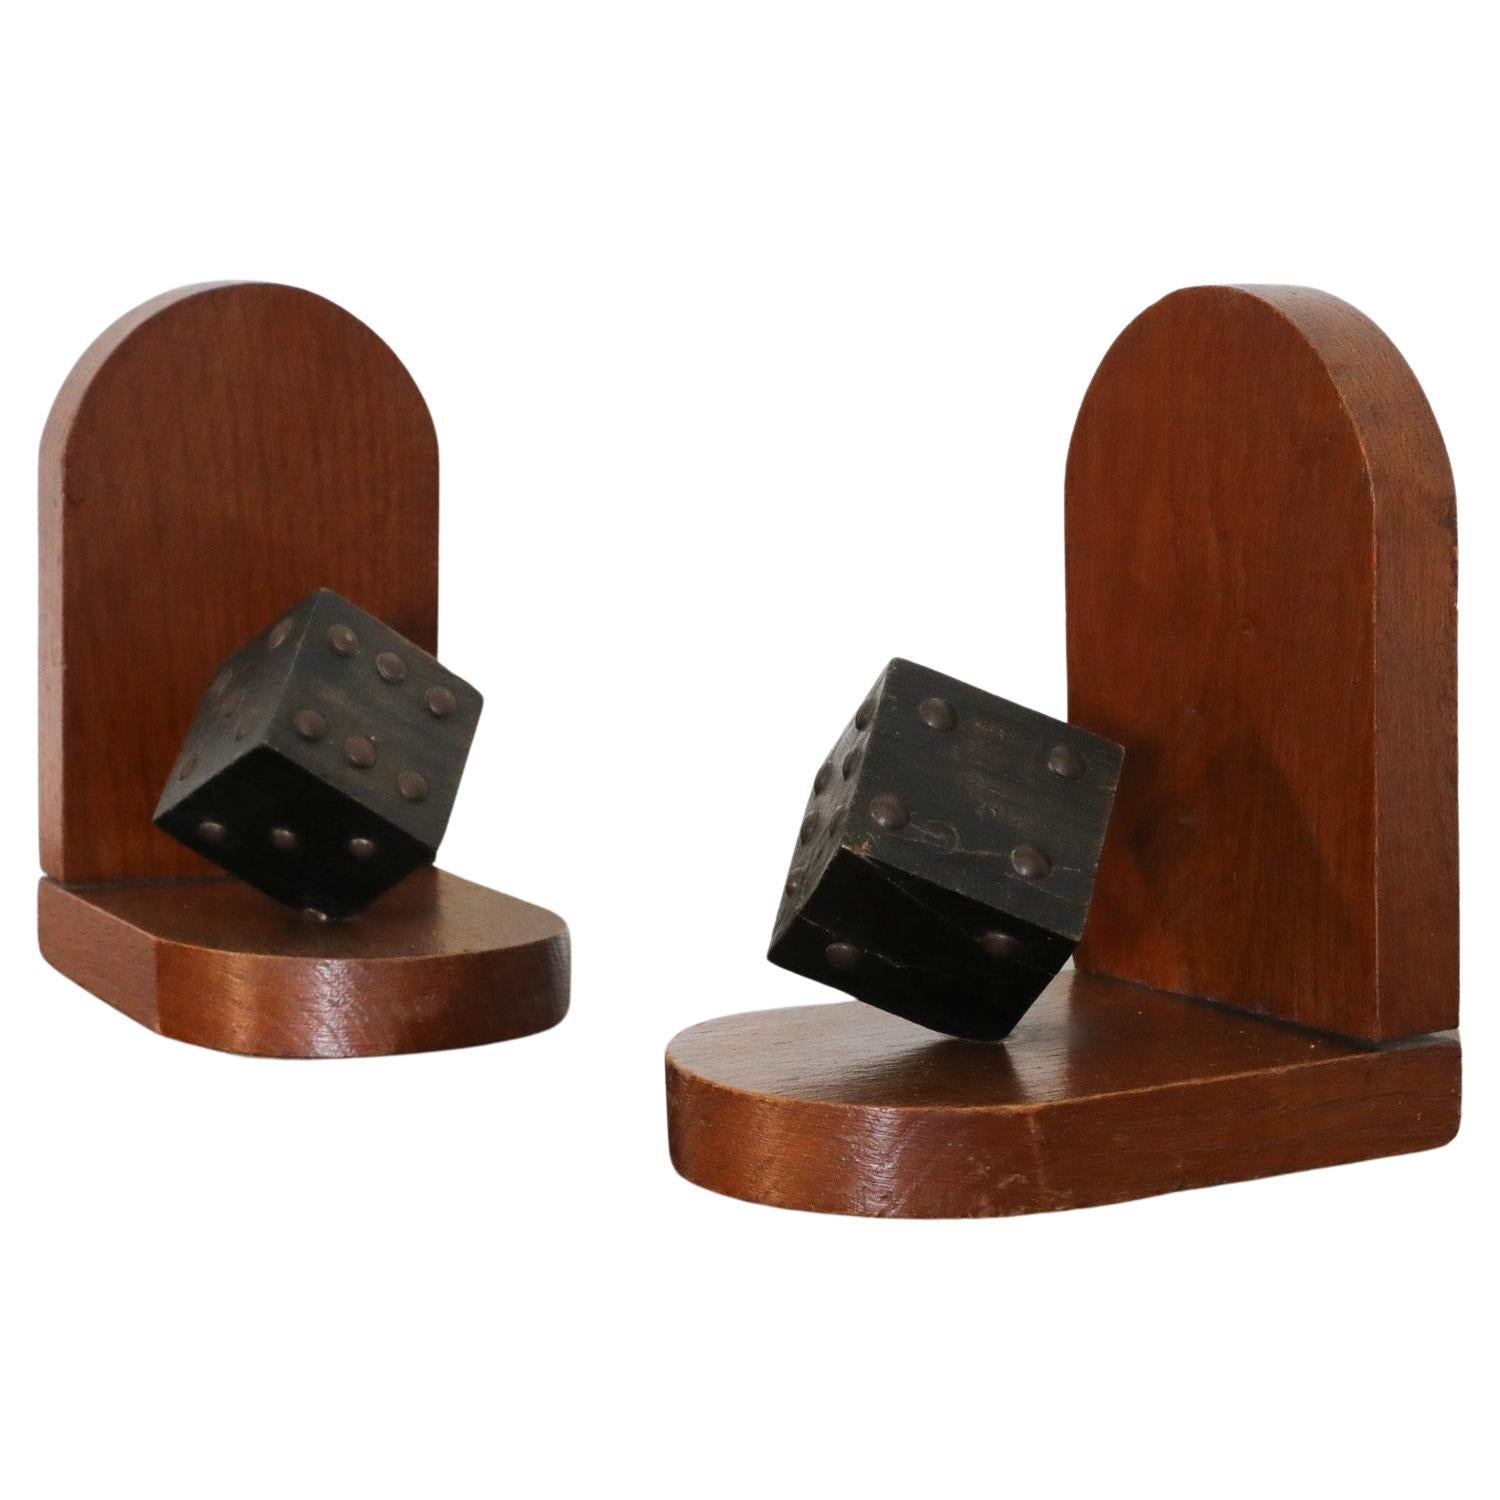 Pair of Wooden Arts & Crafts Dice Bookends